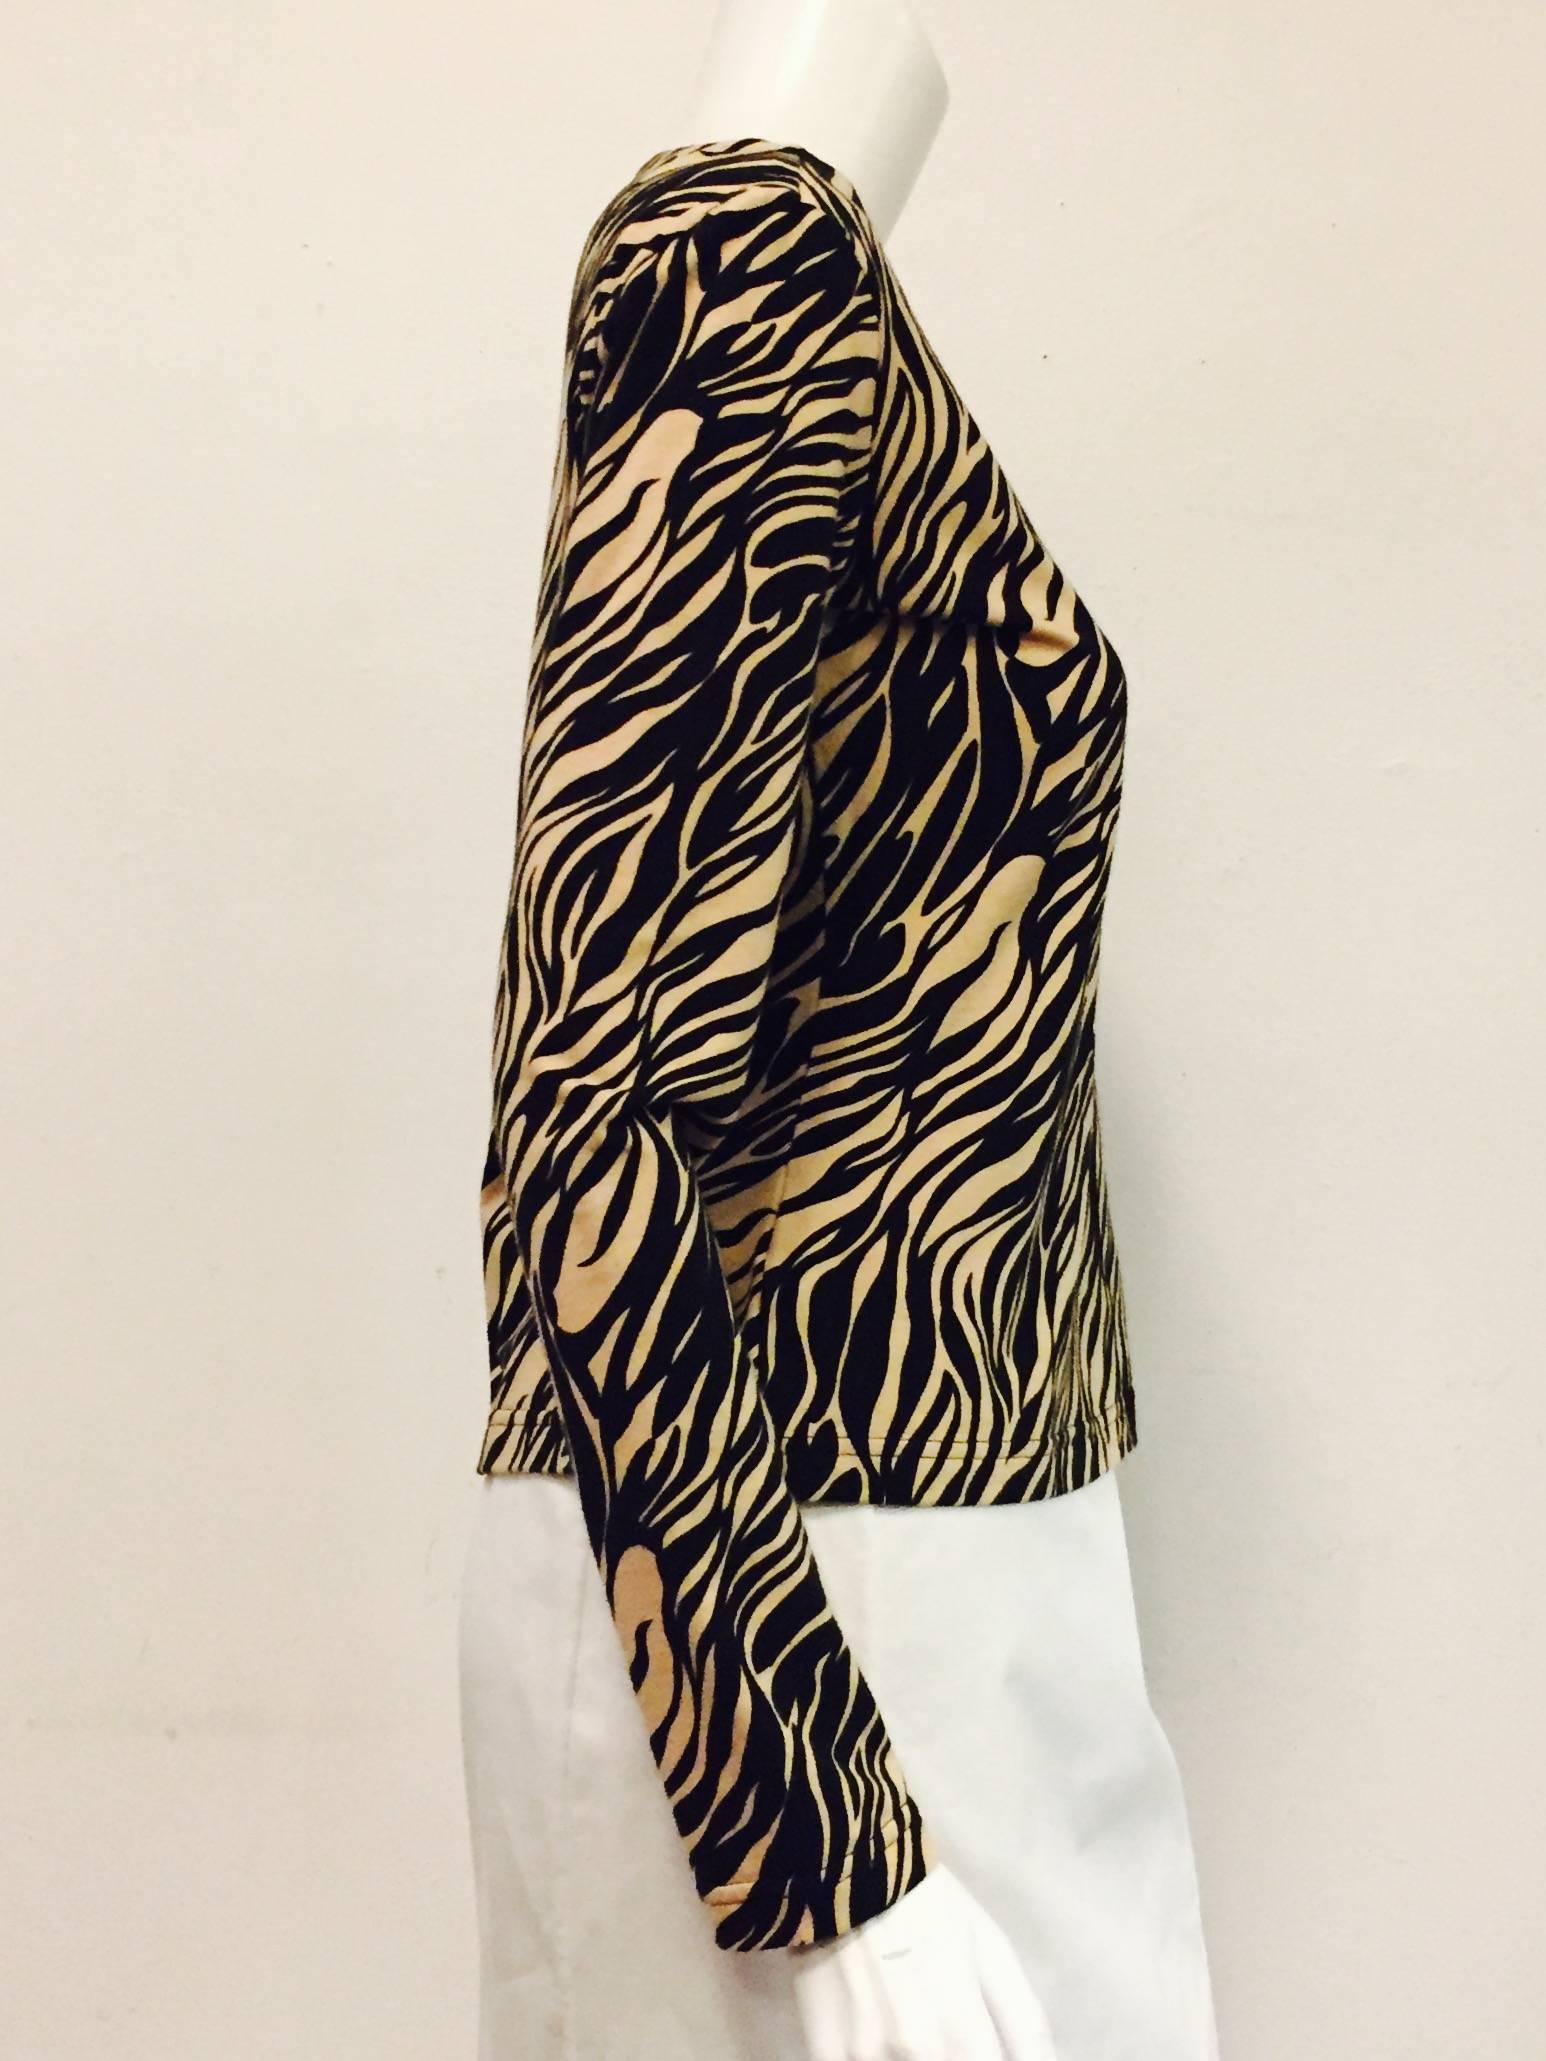 Featuring boat neckline and long sleeves, this Versace tiger print top is worthy of any vamp.  Ultra-luxurious soft cotton knit is versatile enough to be worn with a casual pair of slacks or beneath a smart jacket.  Excellent Condition!  Made in